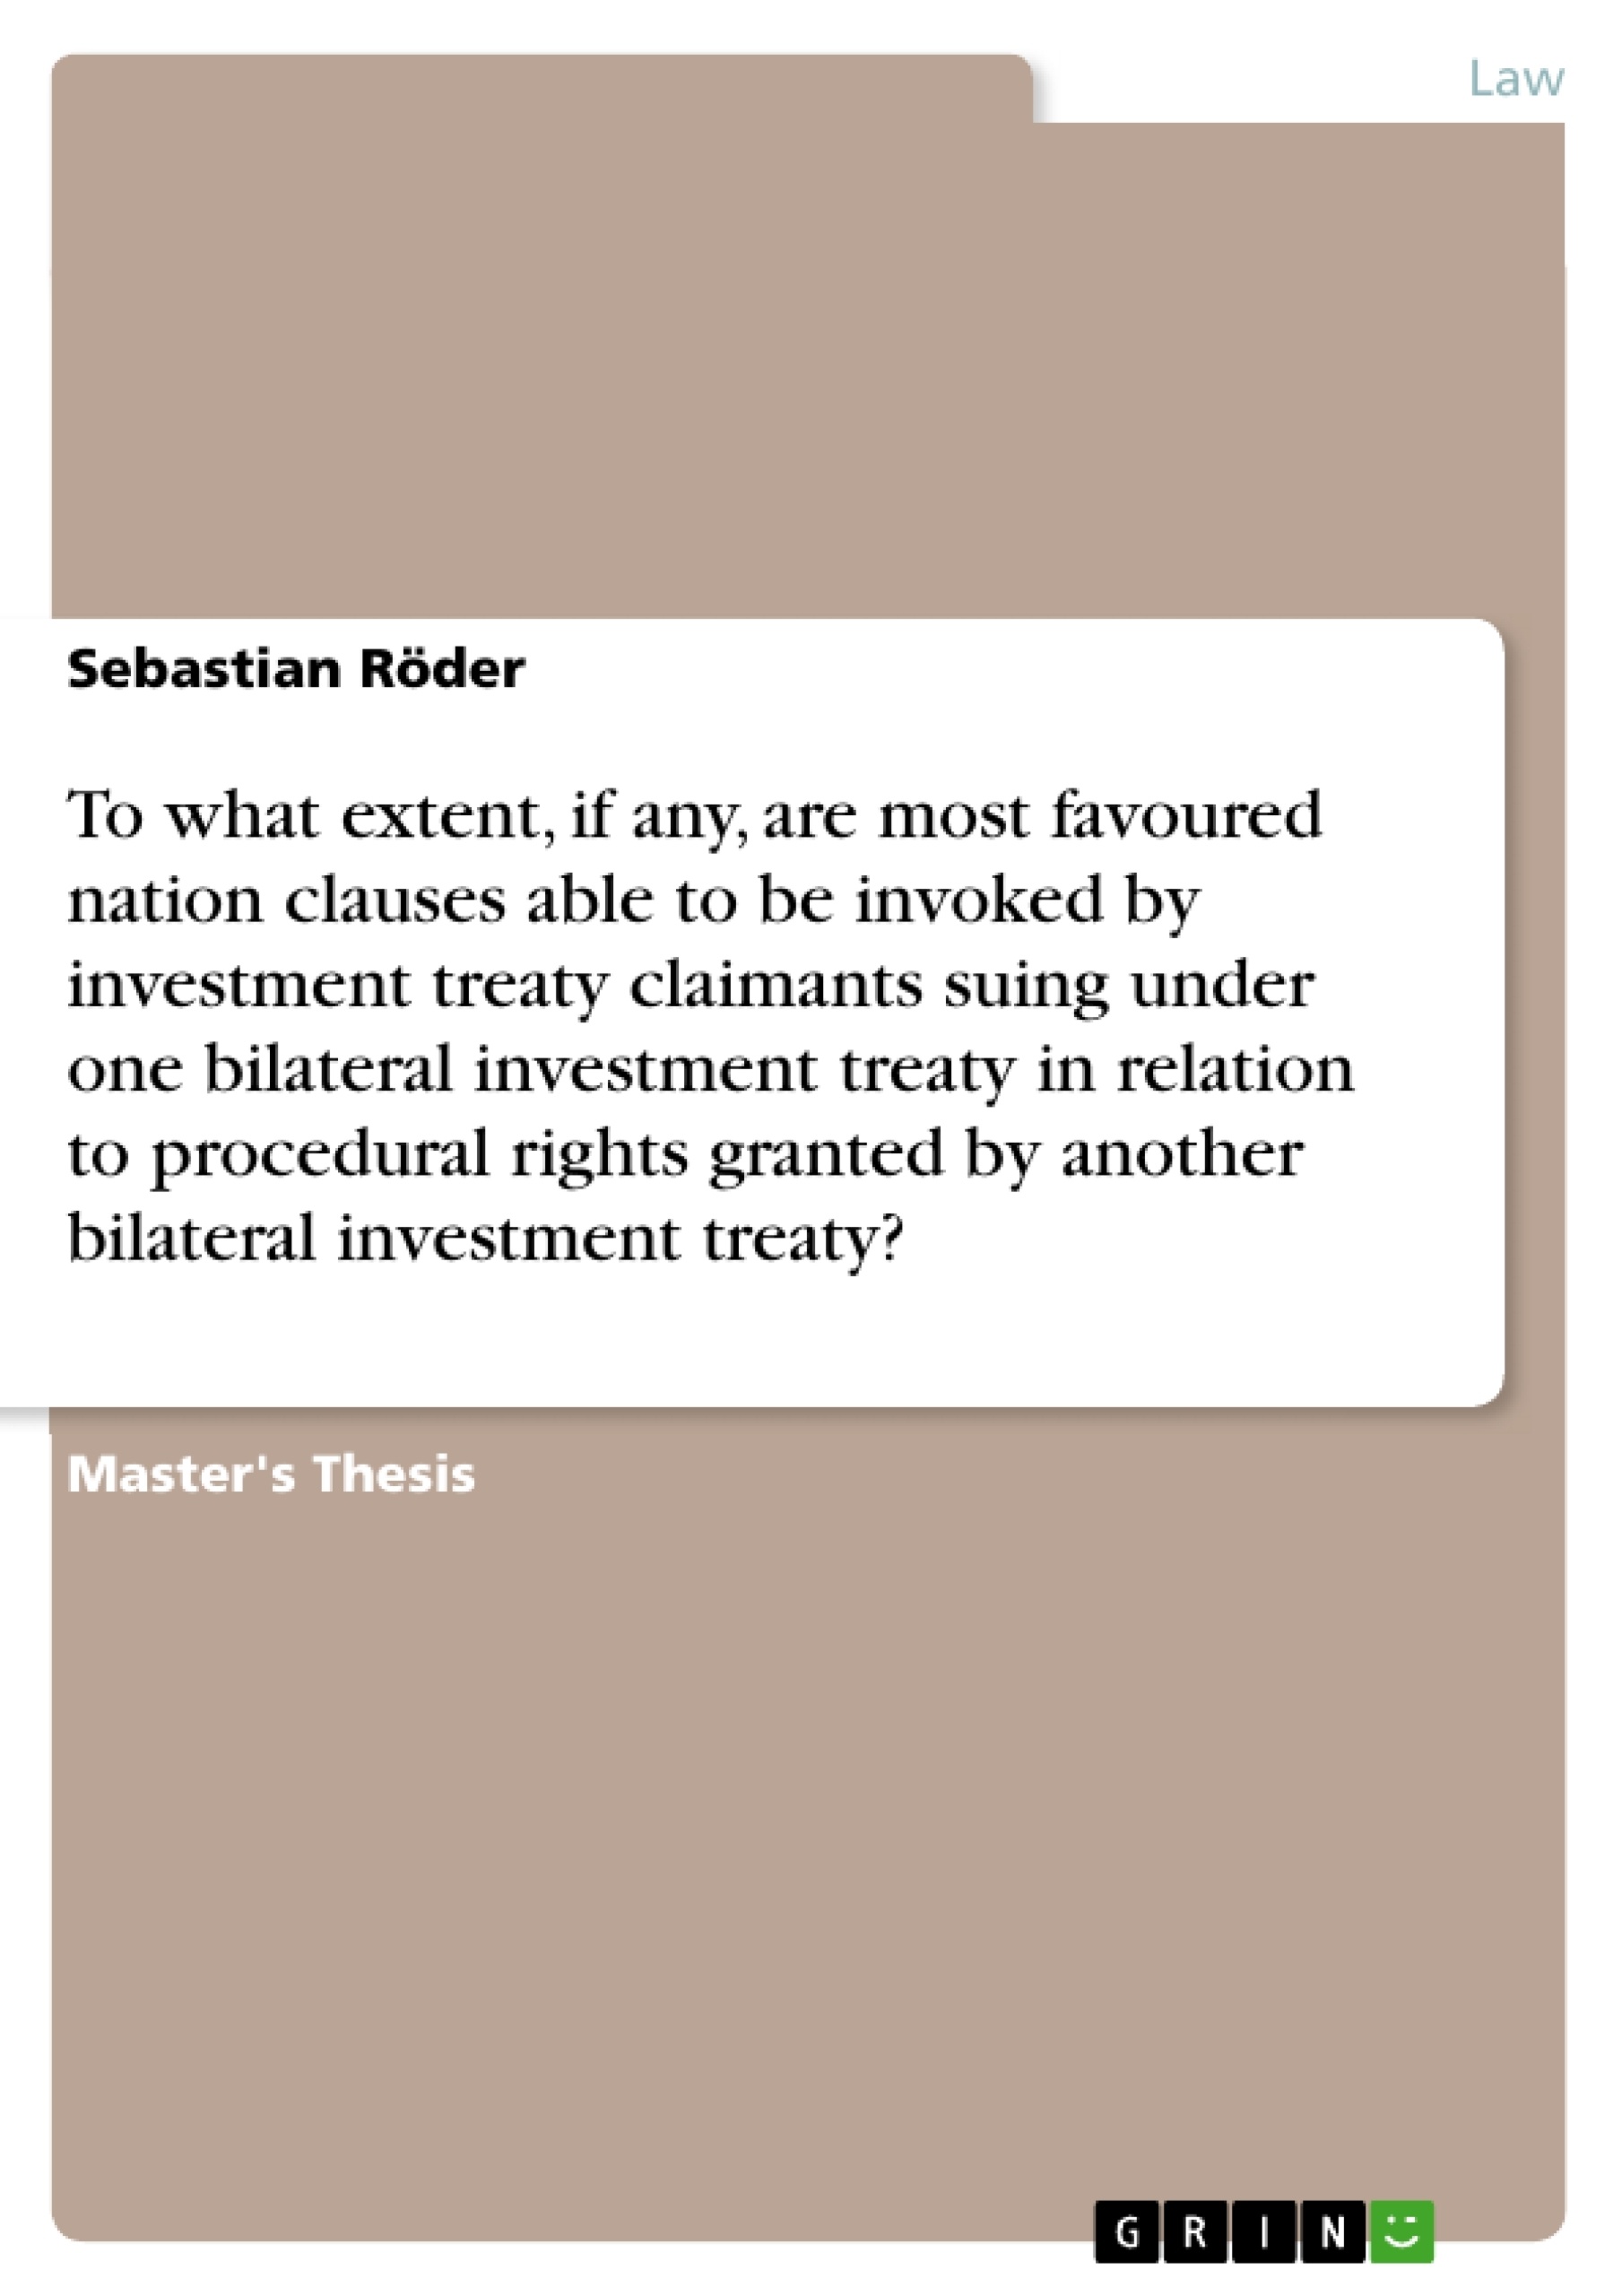 Titel: To what extent, if any, are most favoured nation clauses able to be invoked by investment treaty claimants suing under one bilateral investment treaty in relation to procedural rights granted by another bilateral investment treaty?